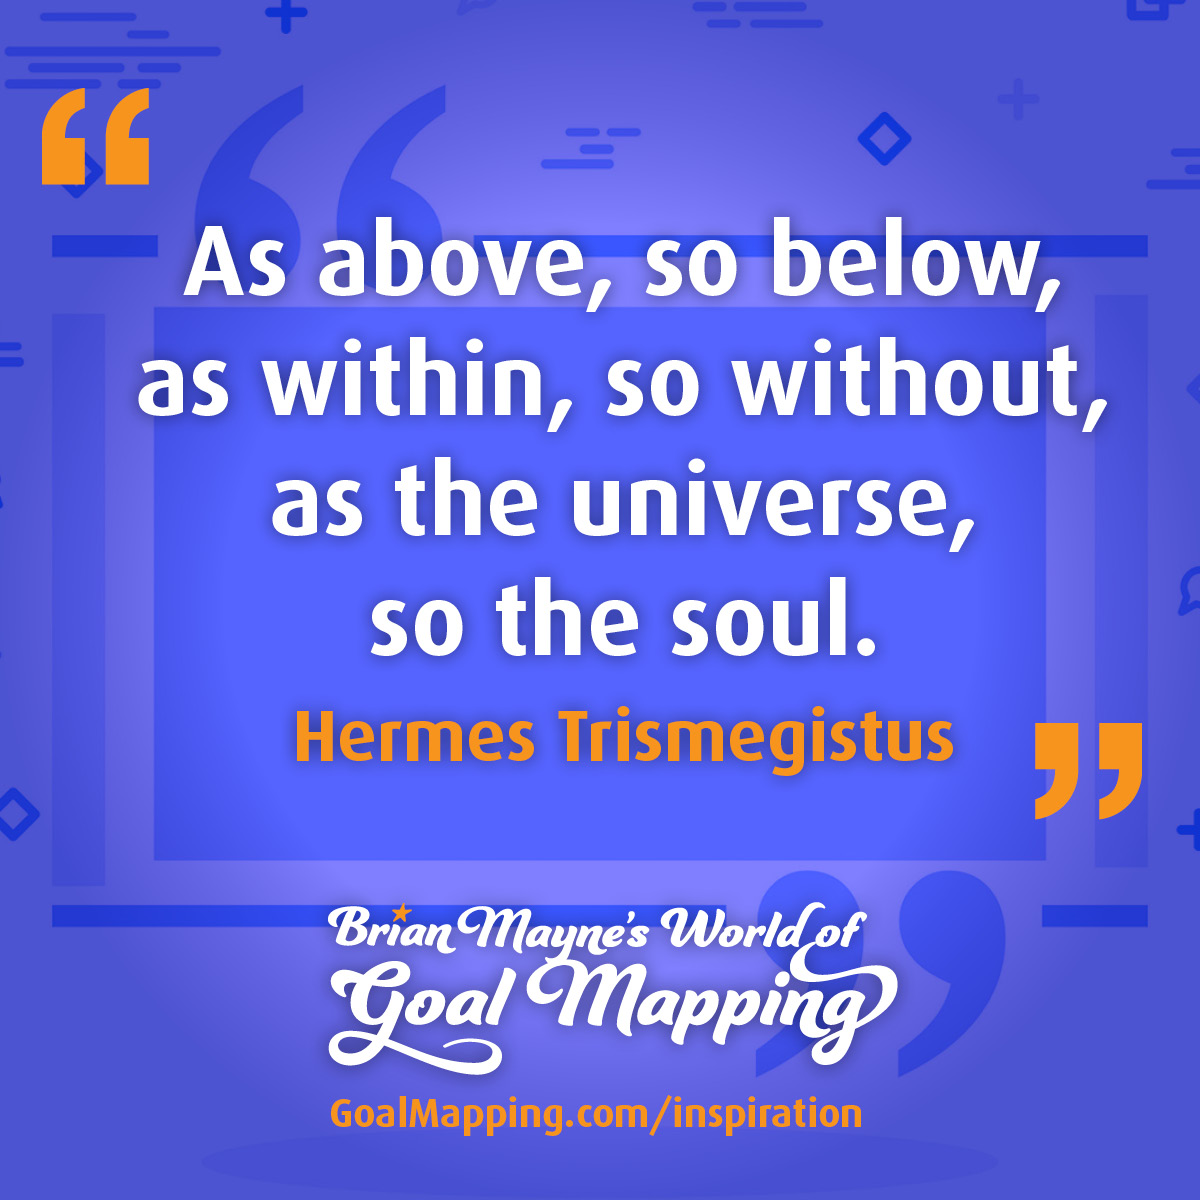 "As above, so below, as within, so without, as the universe, so the soul." Hermes Trismegistus